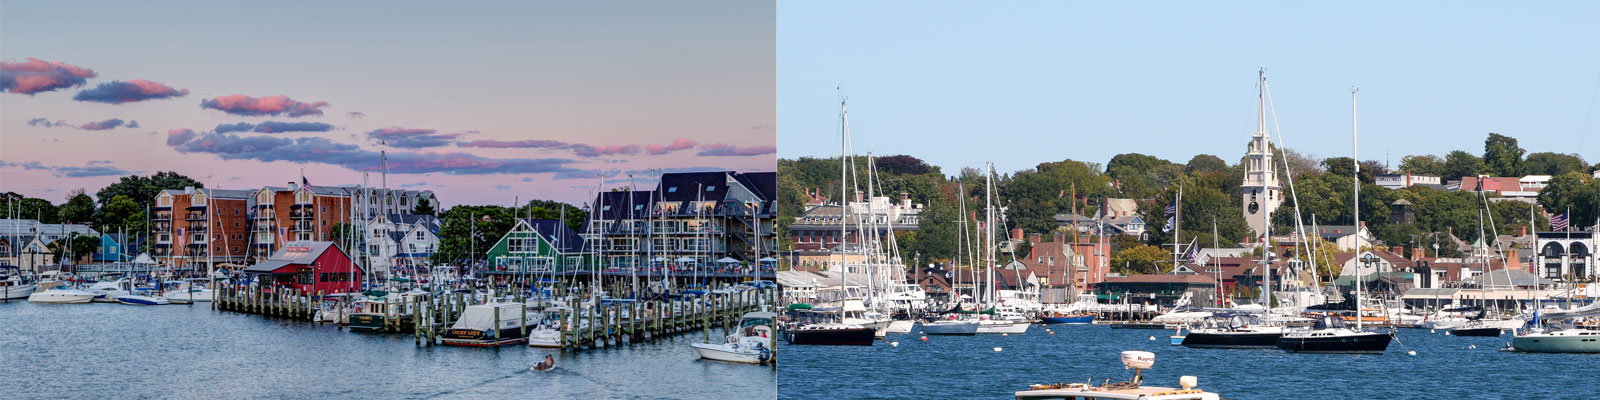 Sailing and Seafood – Annapolis or Newport?